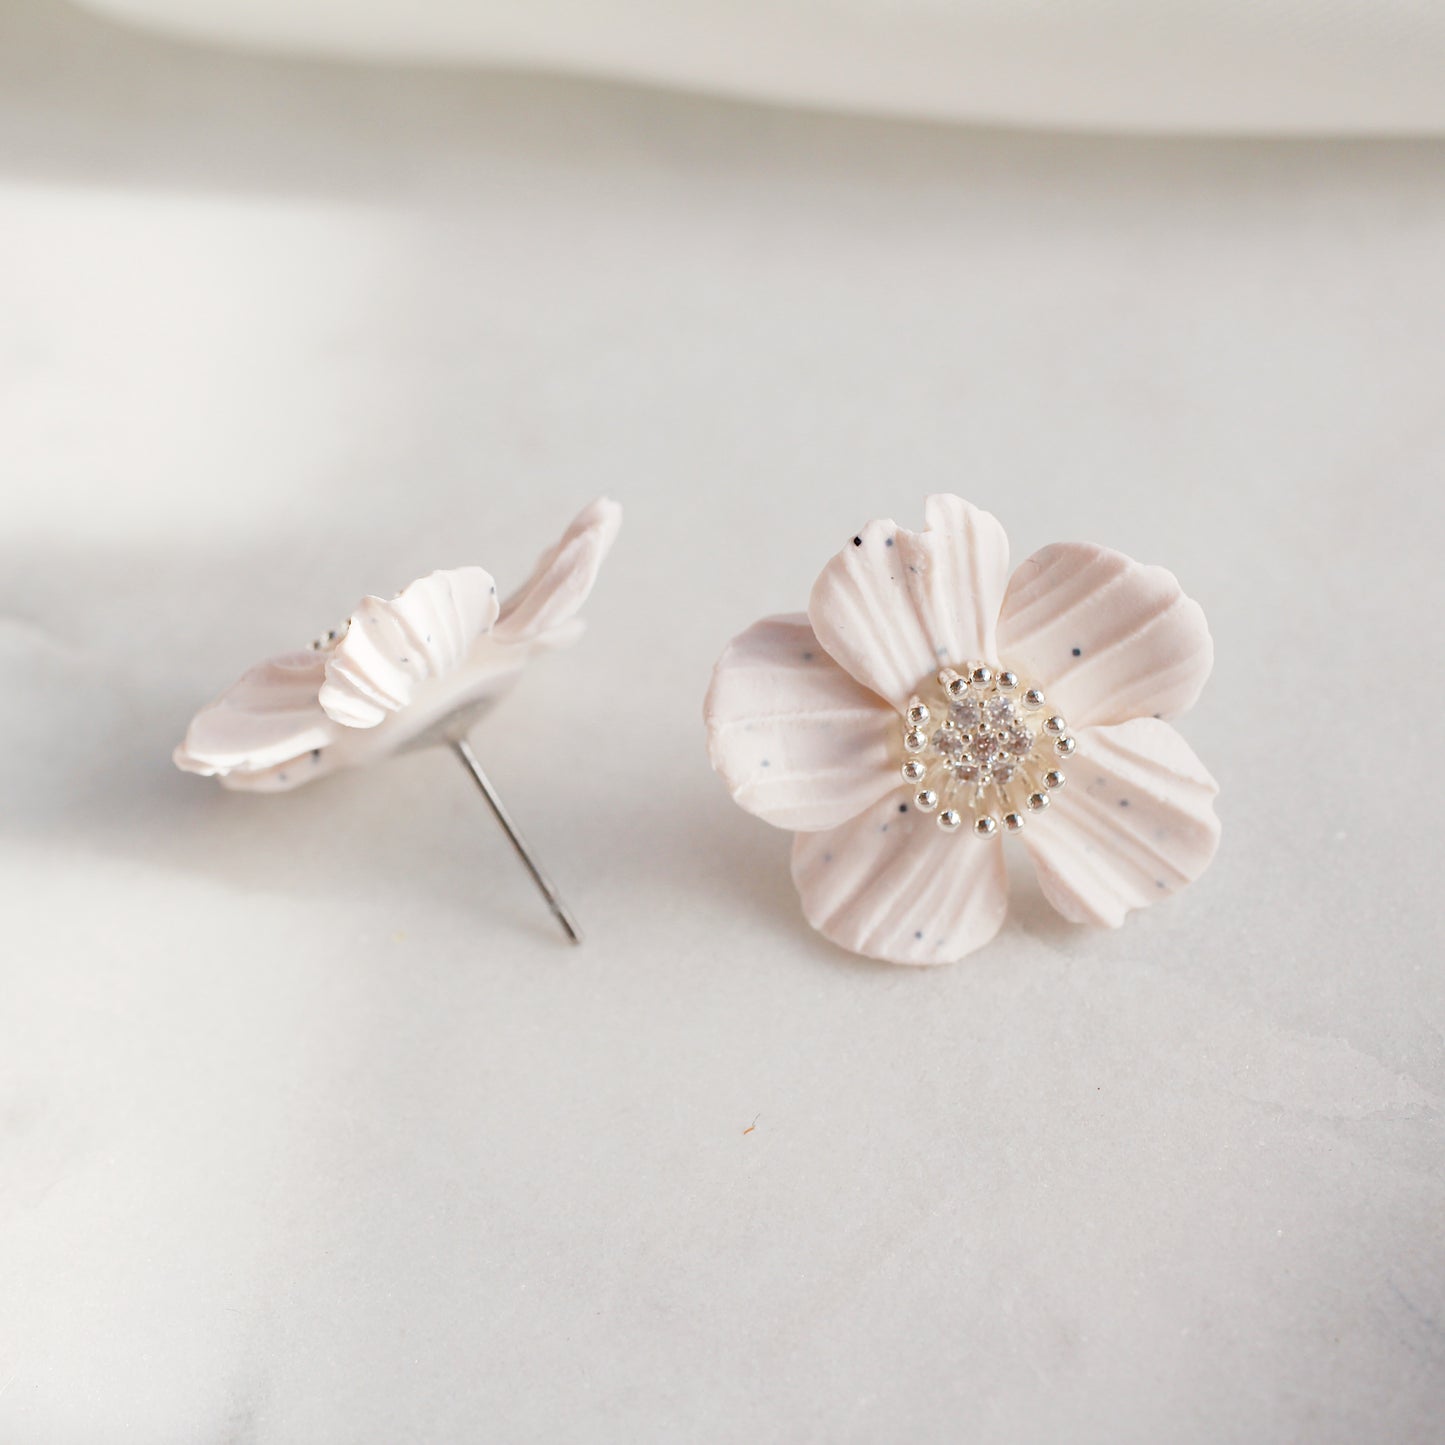 Whimsical studs in off-white (silver)